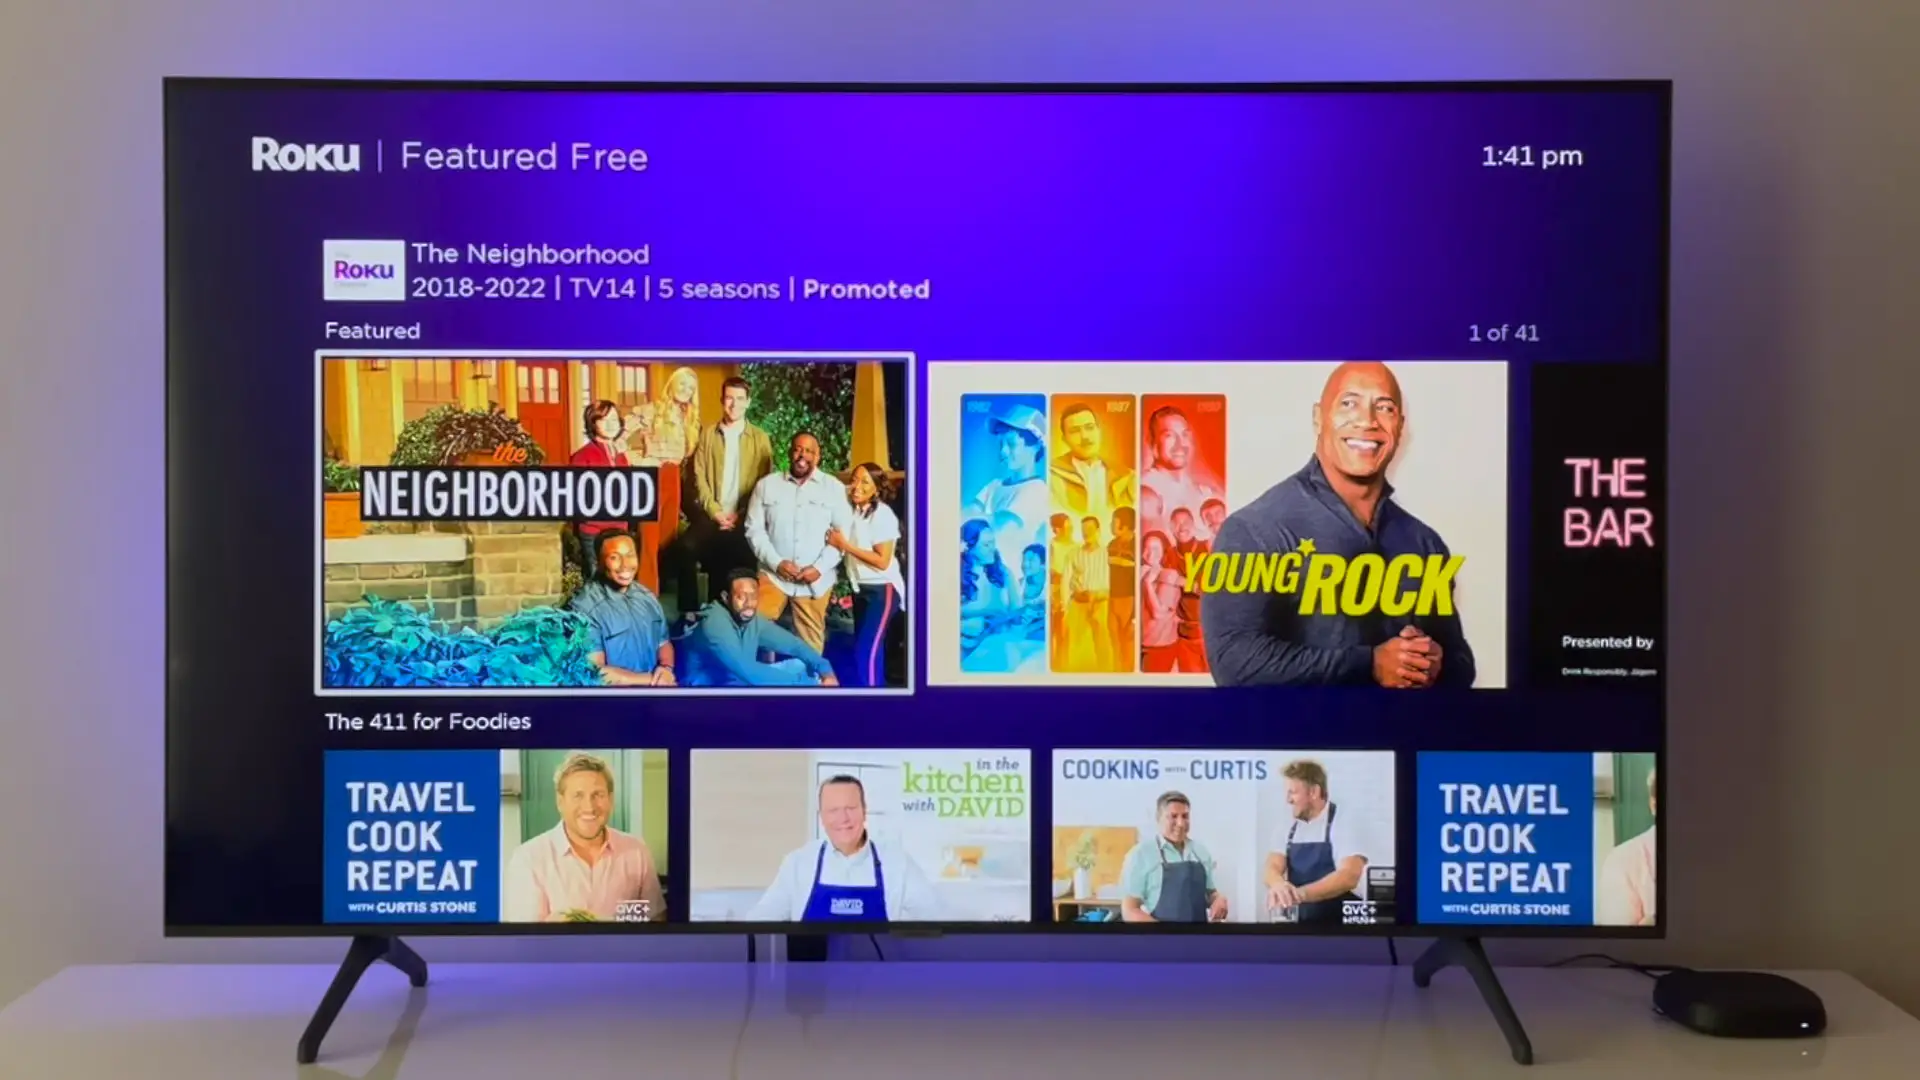 How to turn on Roku TV without remote